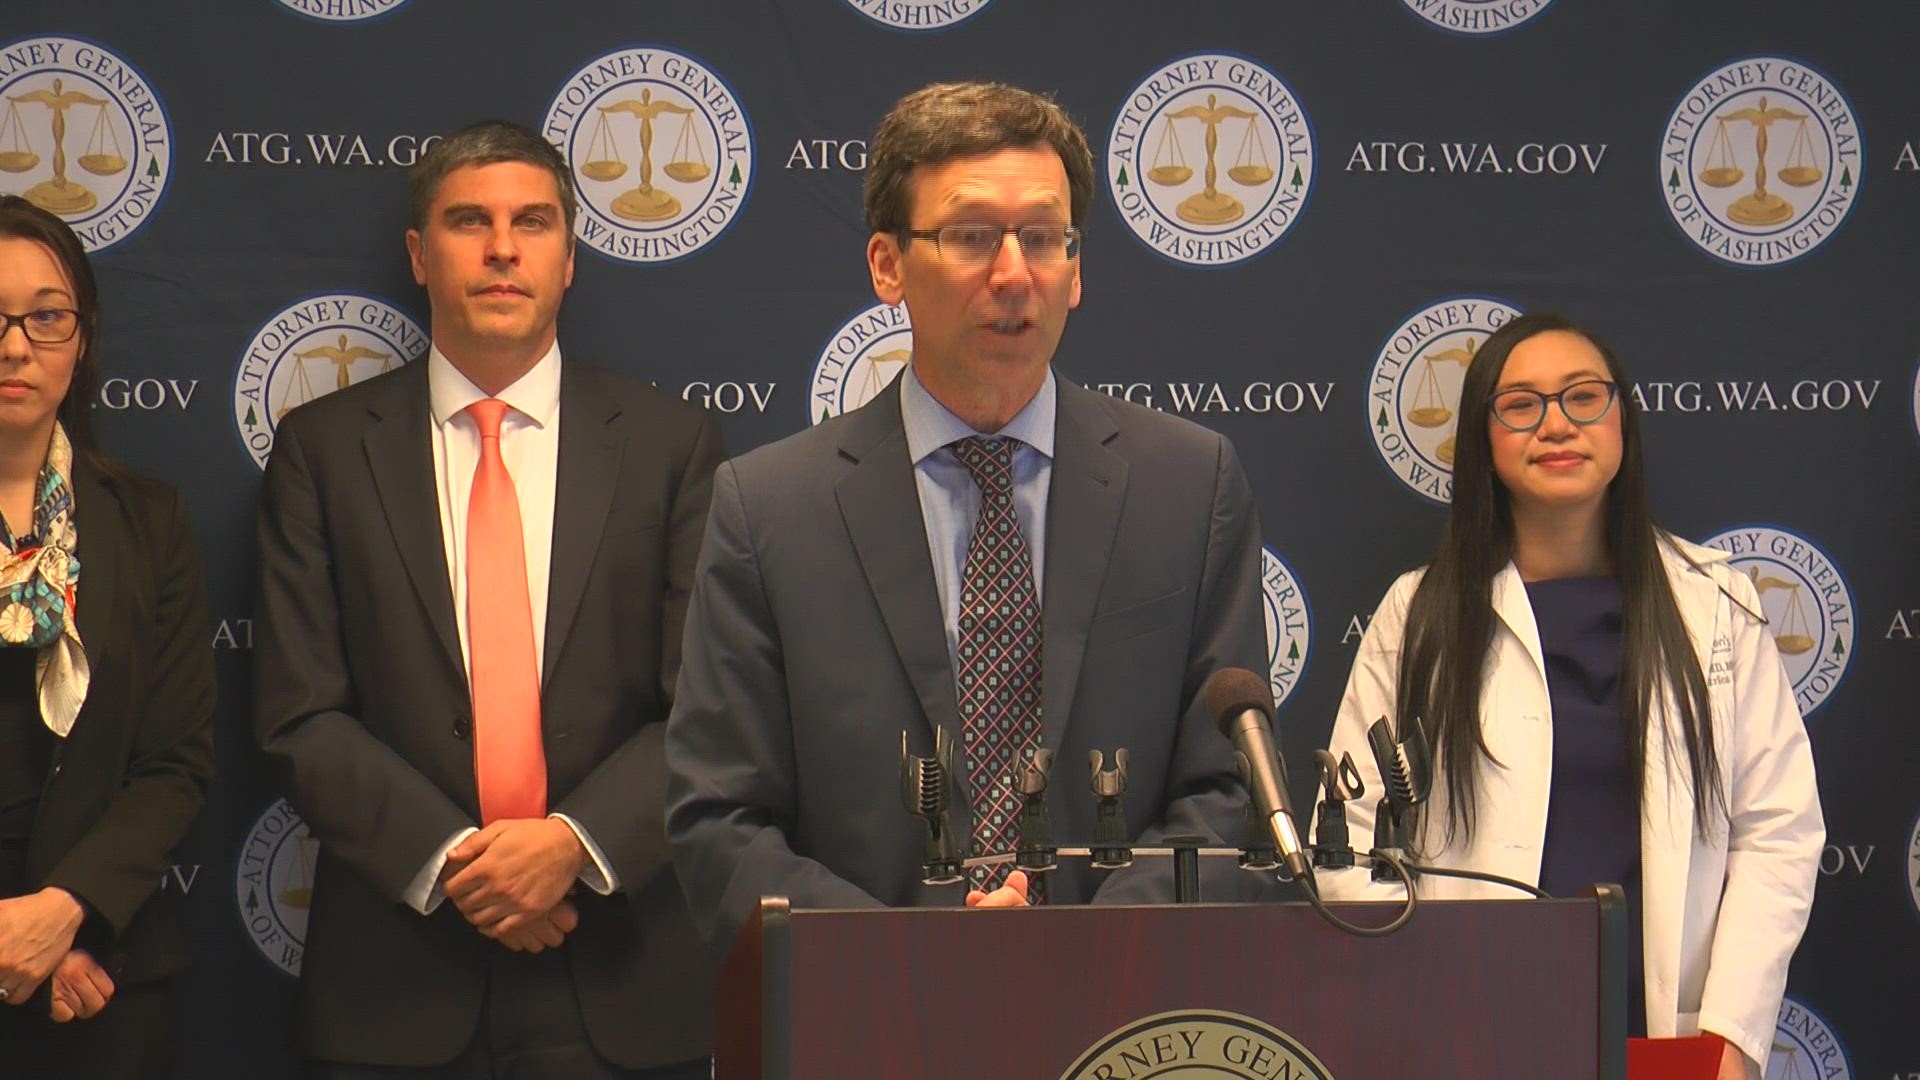 Washington Attorney General Bob Ferguson filed a consumer protection lawsuit in 2020, saying the country’s largest e-cigarette company targeted underage consumers.